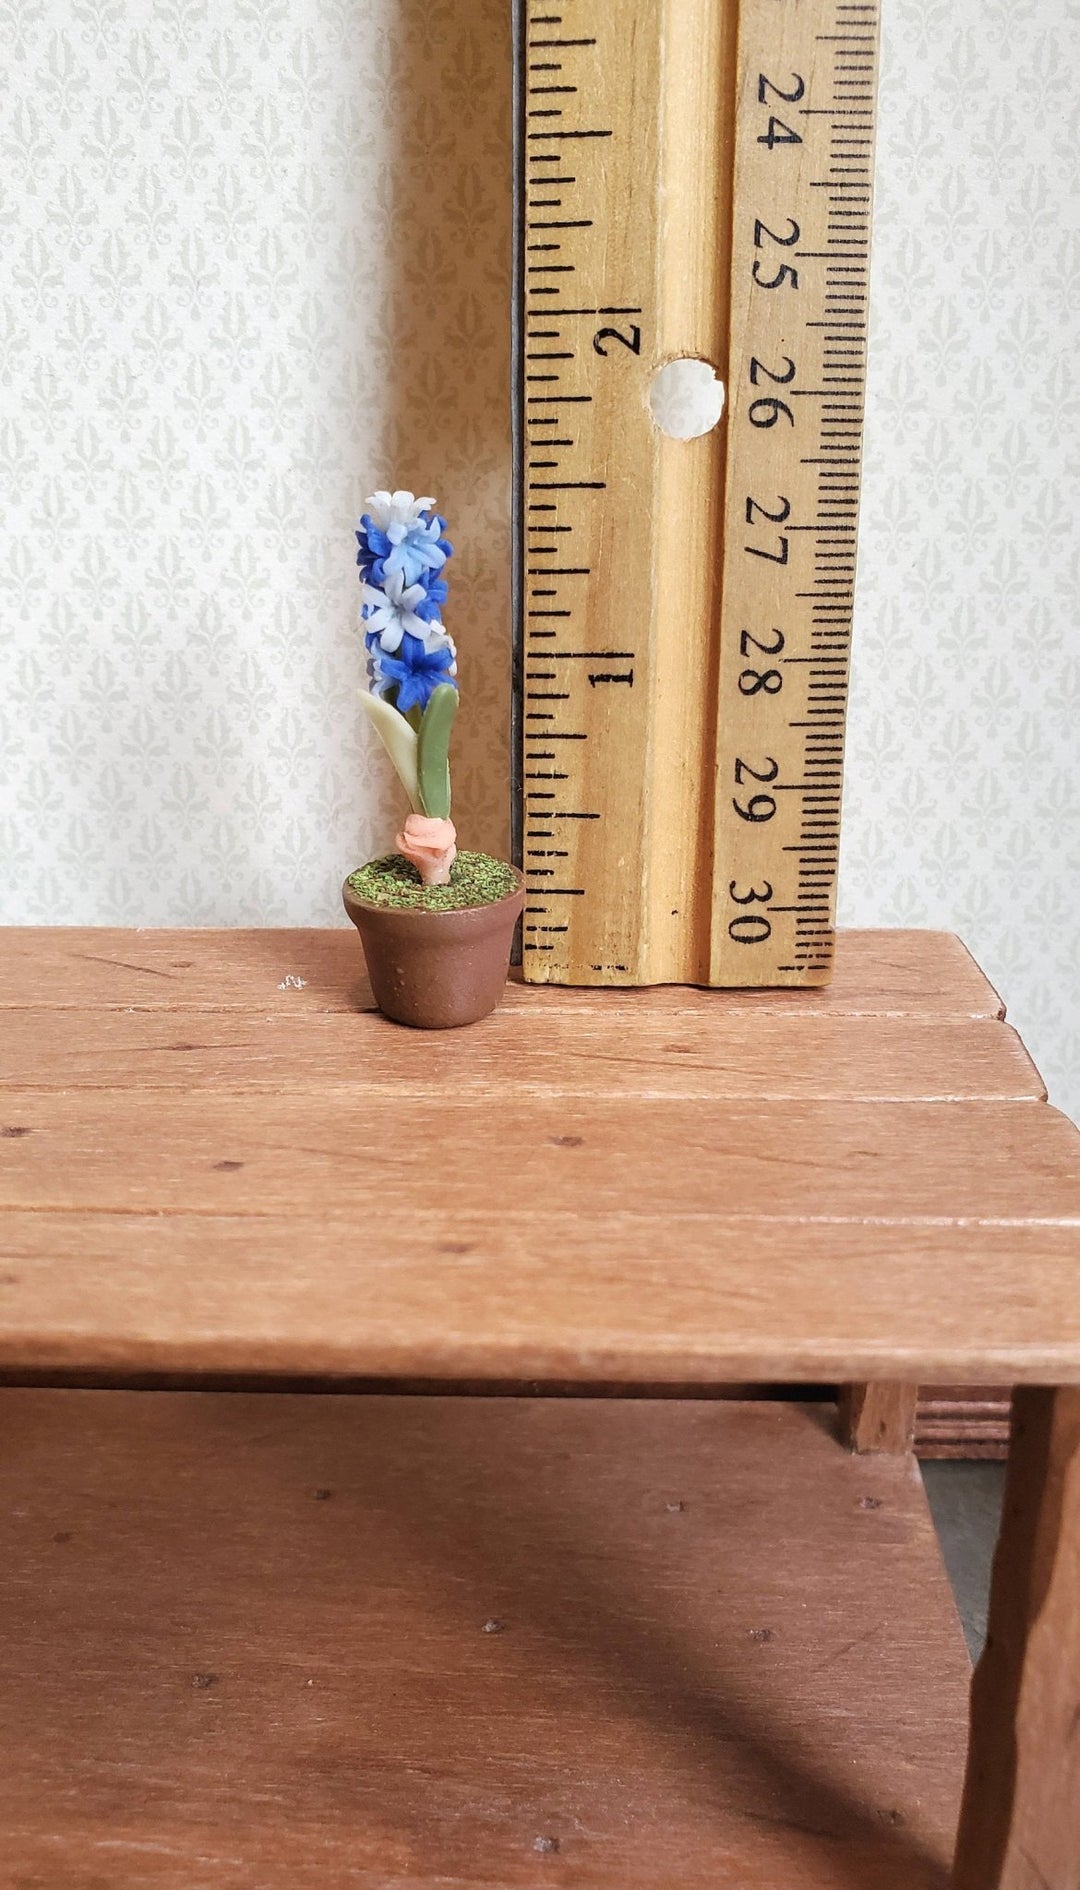 Dollhouse Miniature Potted Hyacinth Purple White Flowering Plant in Clay Pot 1:12 Scale - Miniature Crush